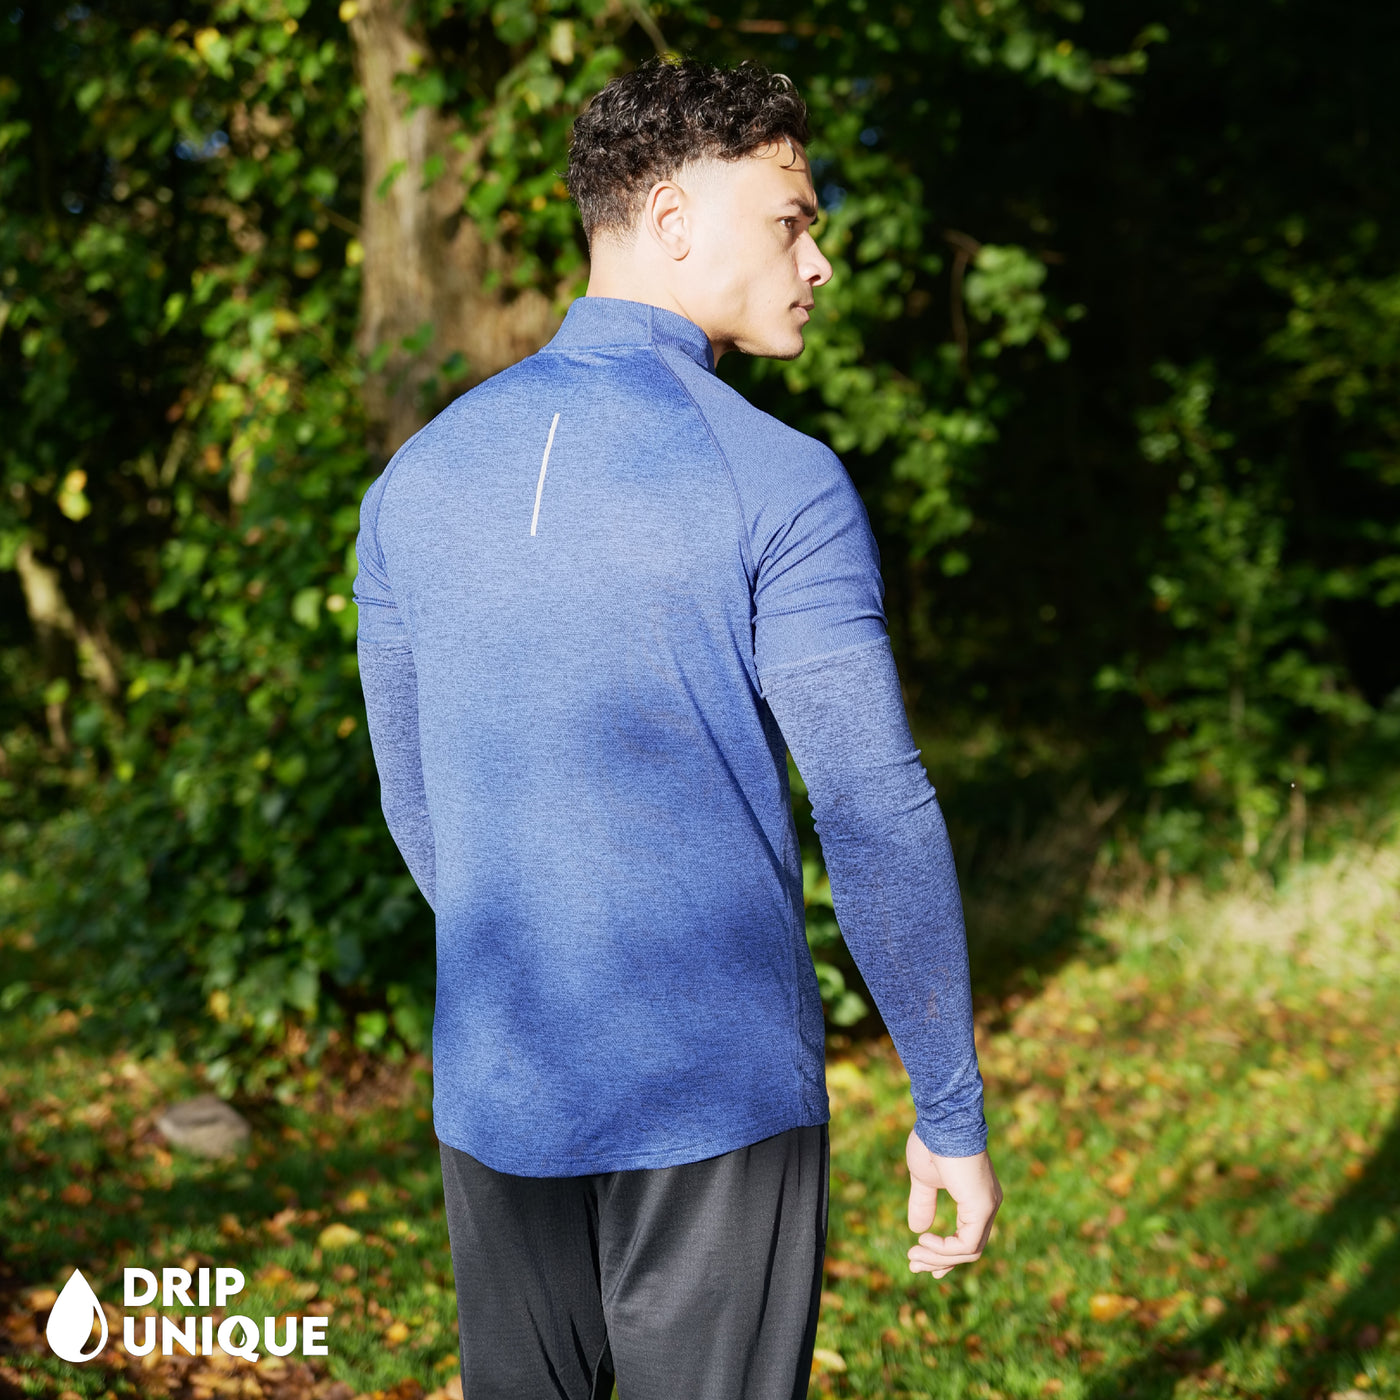 Men's Nike Therma 1/4 Zip Top in a Royal Blue colourway showing the back design worn by our model, dripuniqueuk